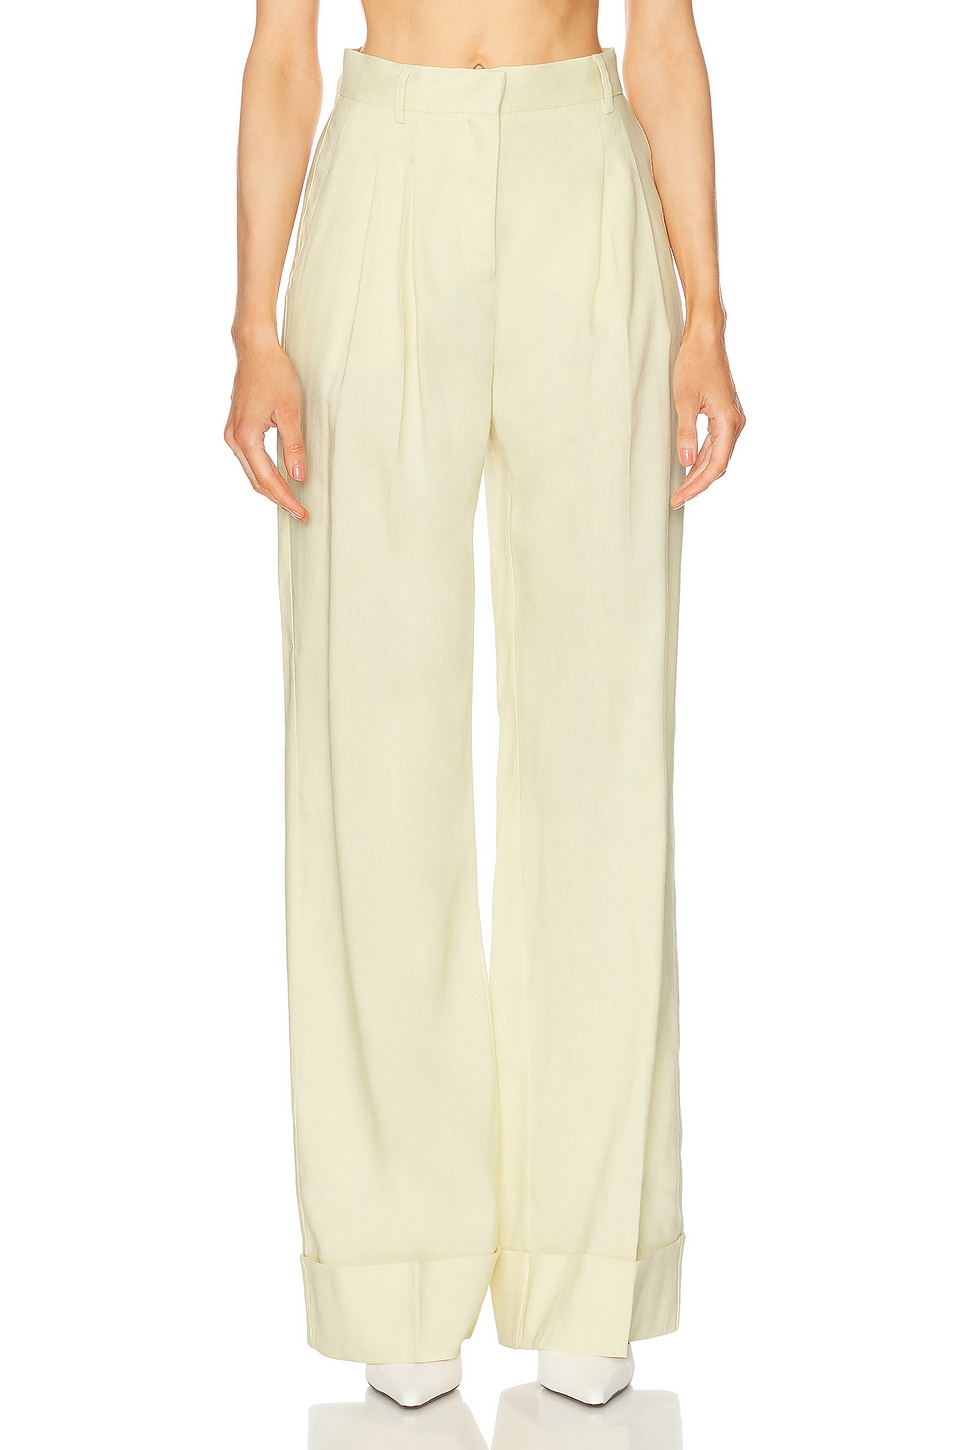 Image 1 of The Andamane Nathalie Cuffed Hem Maxi Pant in Pale Yellow